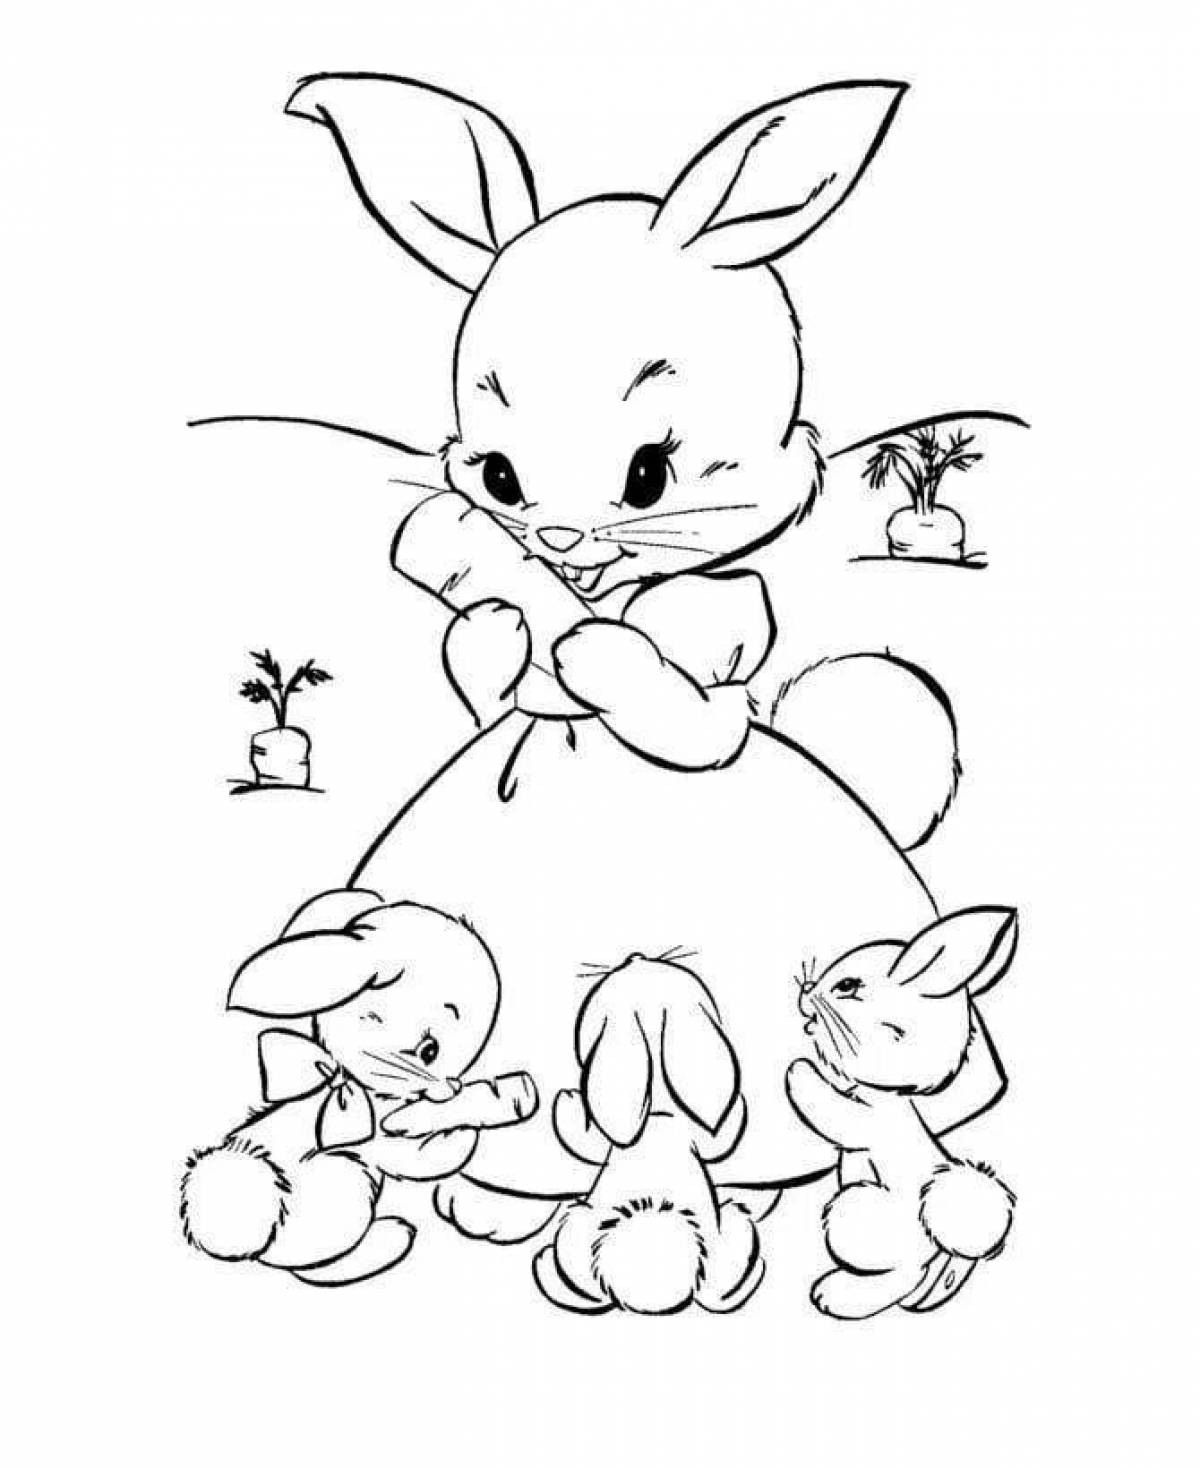 Cute and fluffy bunny coloring book